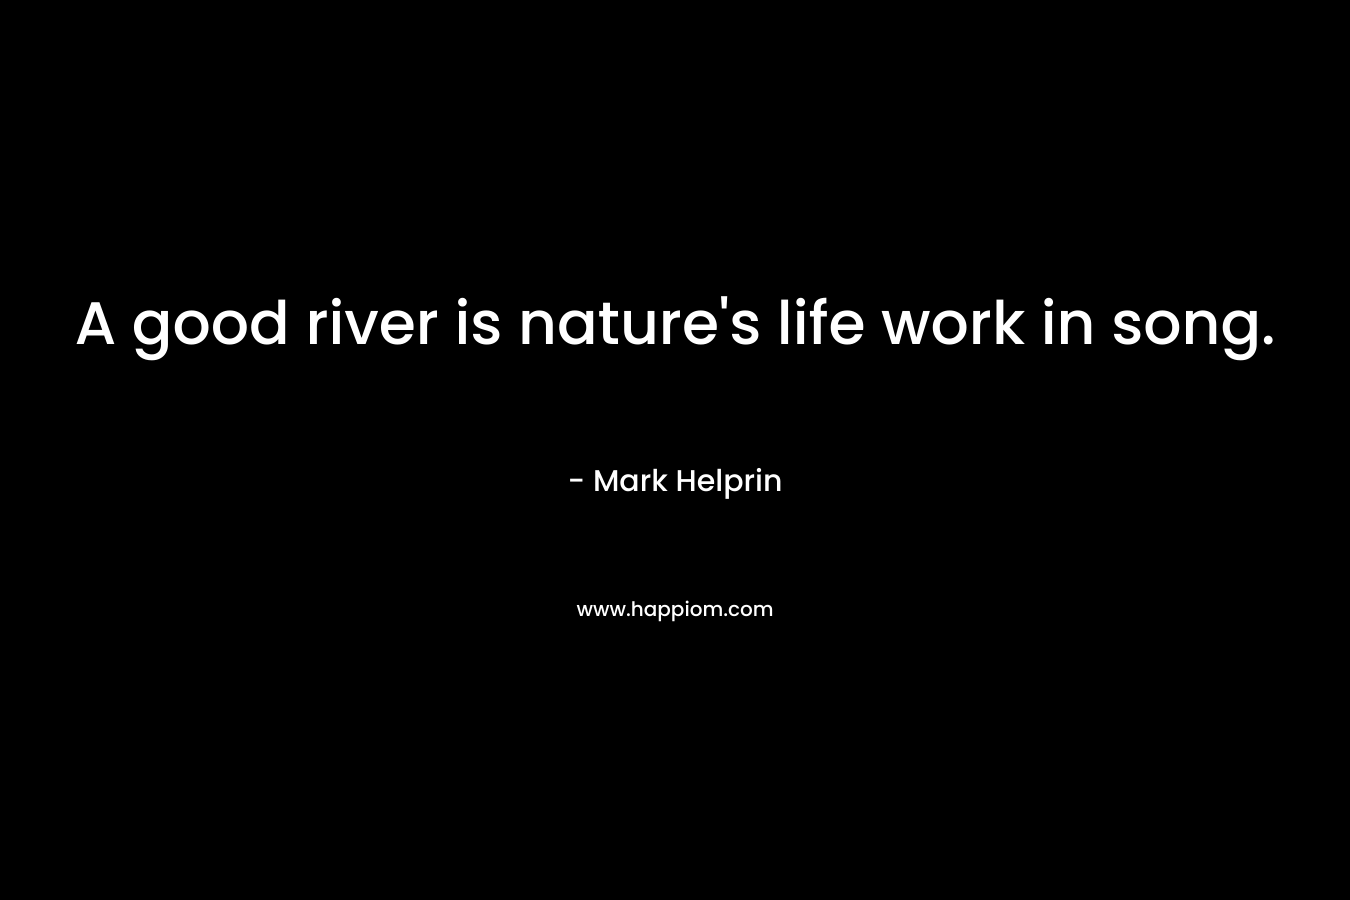 A good river is nature’s life work in song. – Mark Helprin